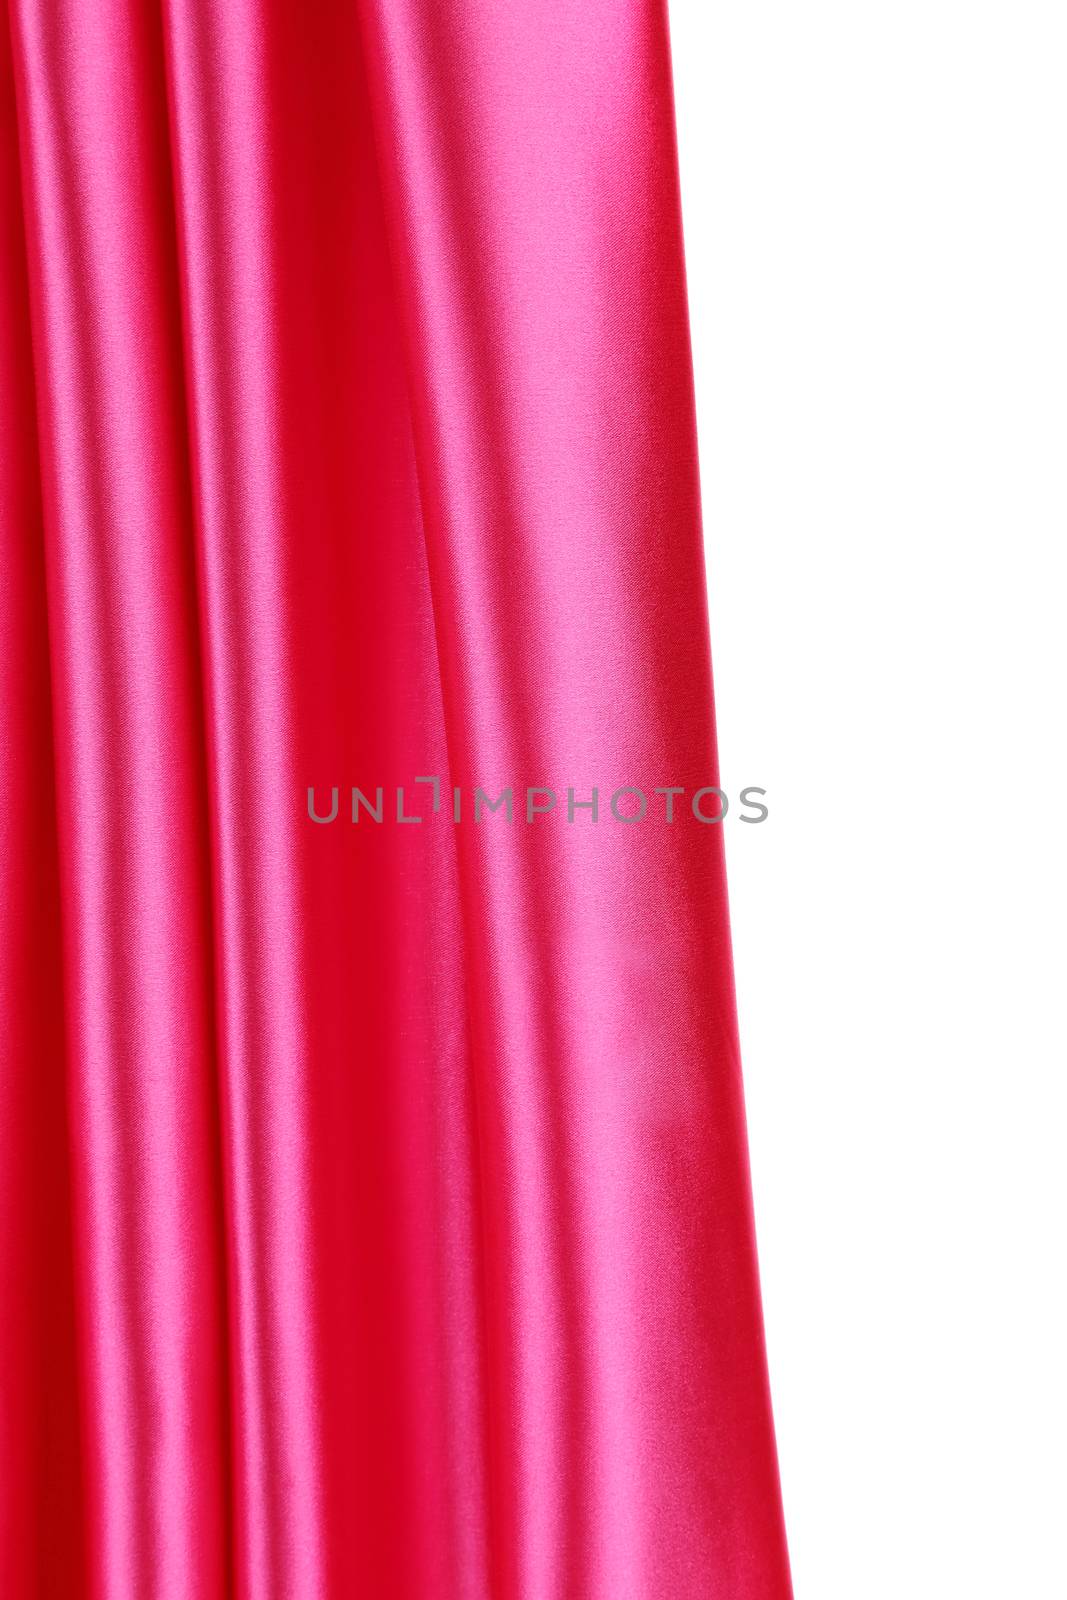 Creases in pink fabric. Close up. by indigolotos